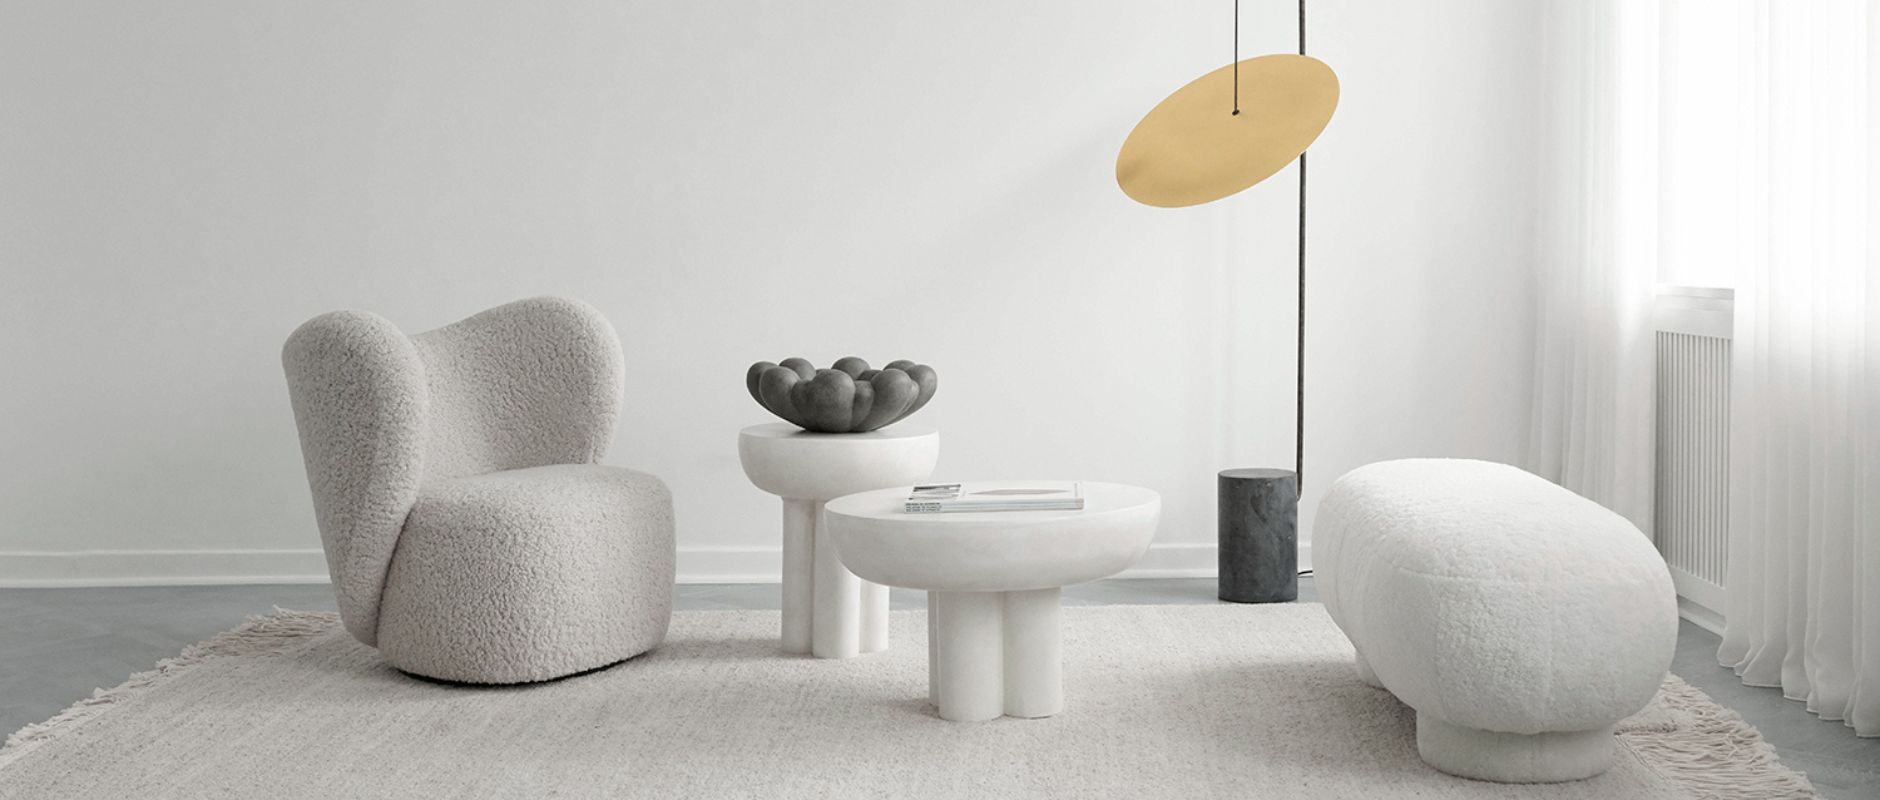 A styled shot of products from 101 COPENHAGEN, including lighting, furniture, and decor. The highlight piece is the large Bloom Tray, which sits on a table. It contrasts the mainly white setting with its black colouring and unique flower-like silhouette.